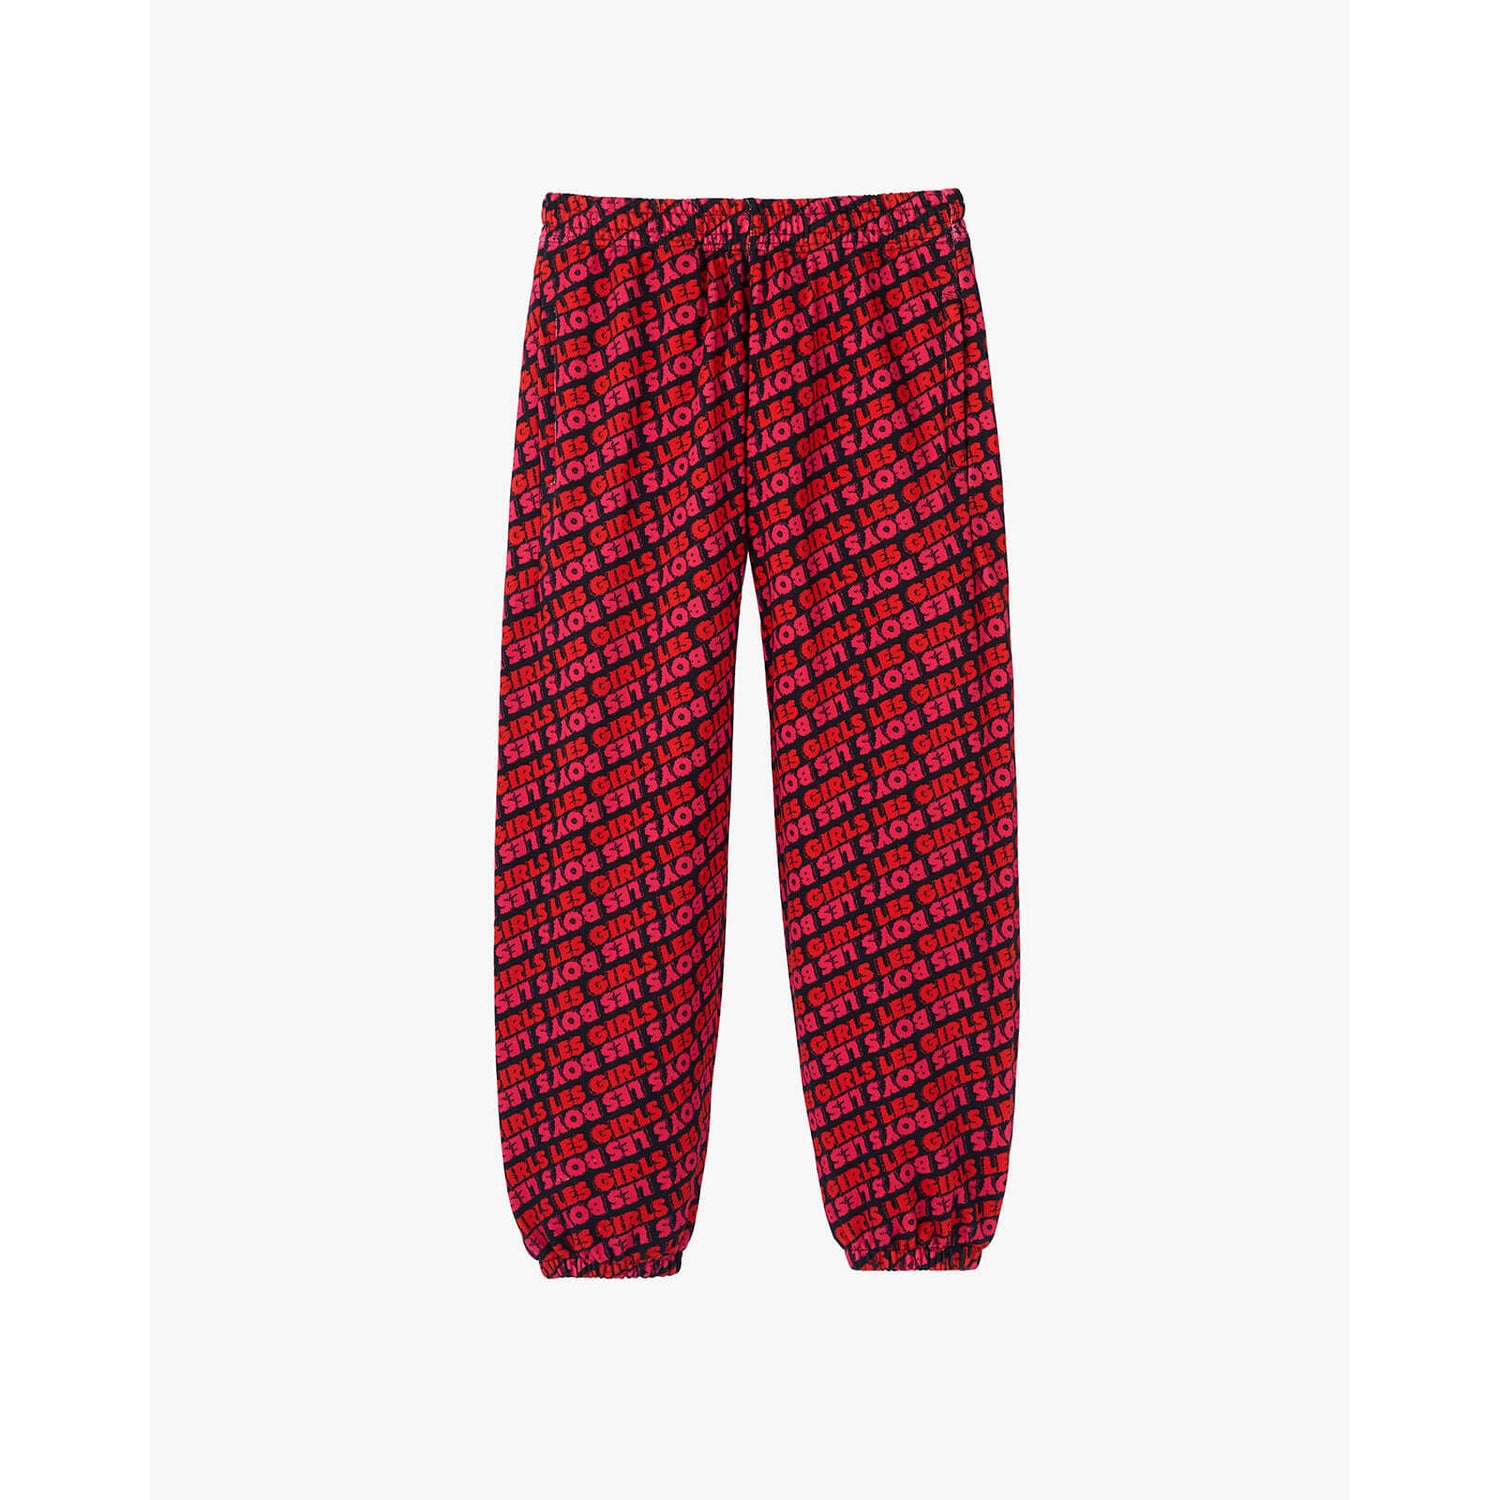 Les Girls Les Boys Women's Fuzzy Print Loose Joggers - Red - XS